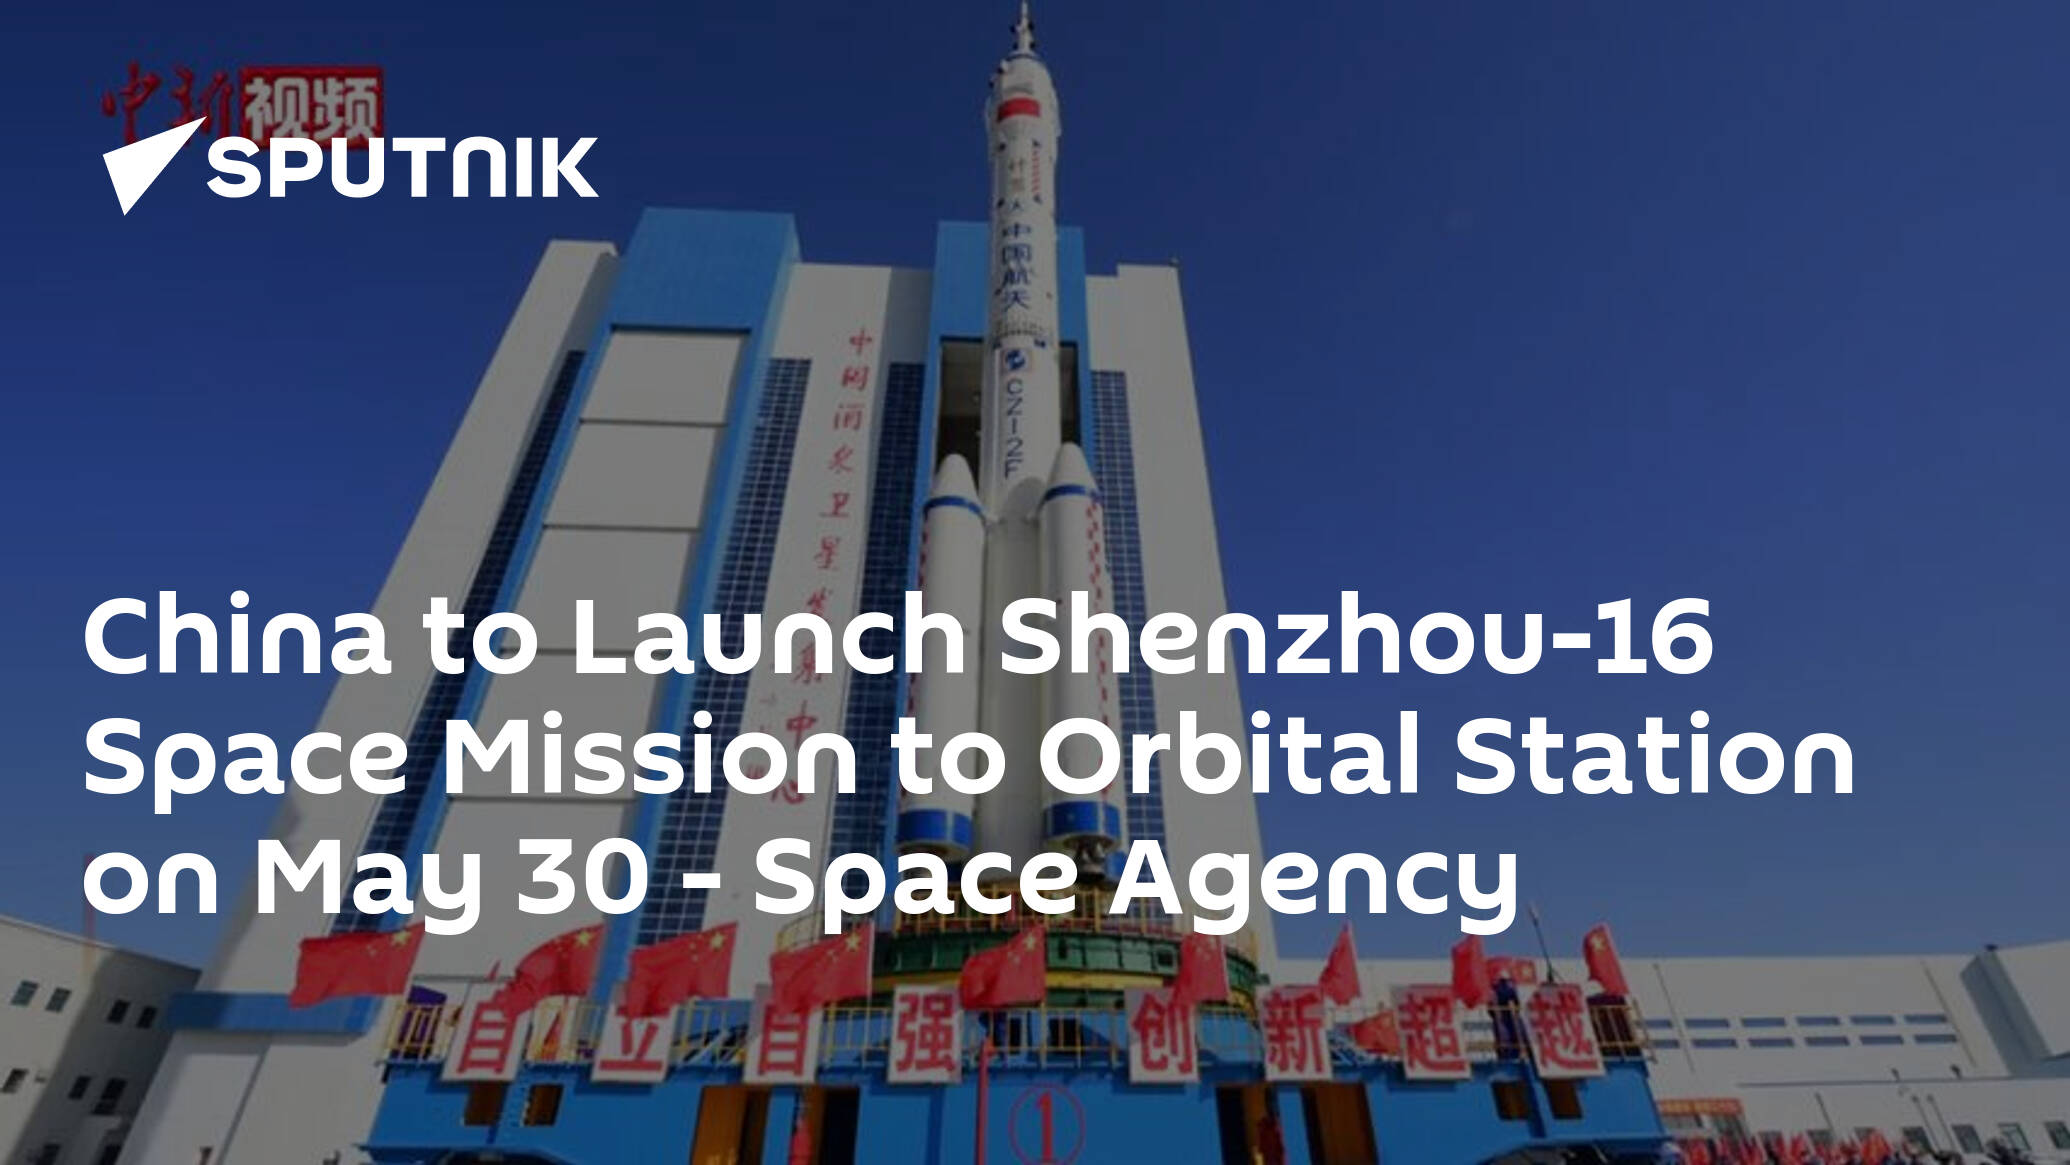 China to Launch Shenzhou-16 Space Mission to Orbital Station on May 30 – Space Agency